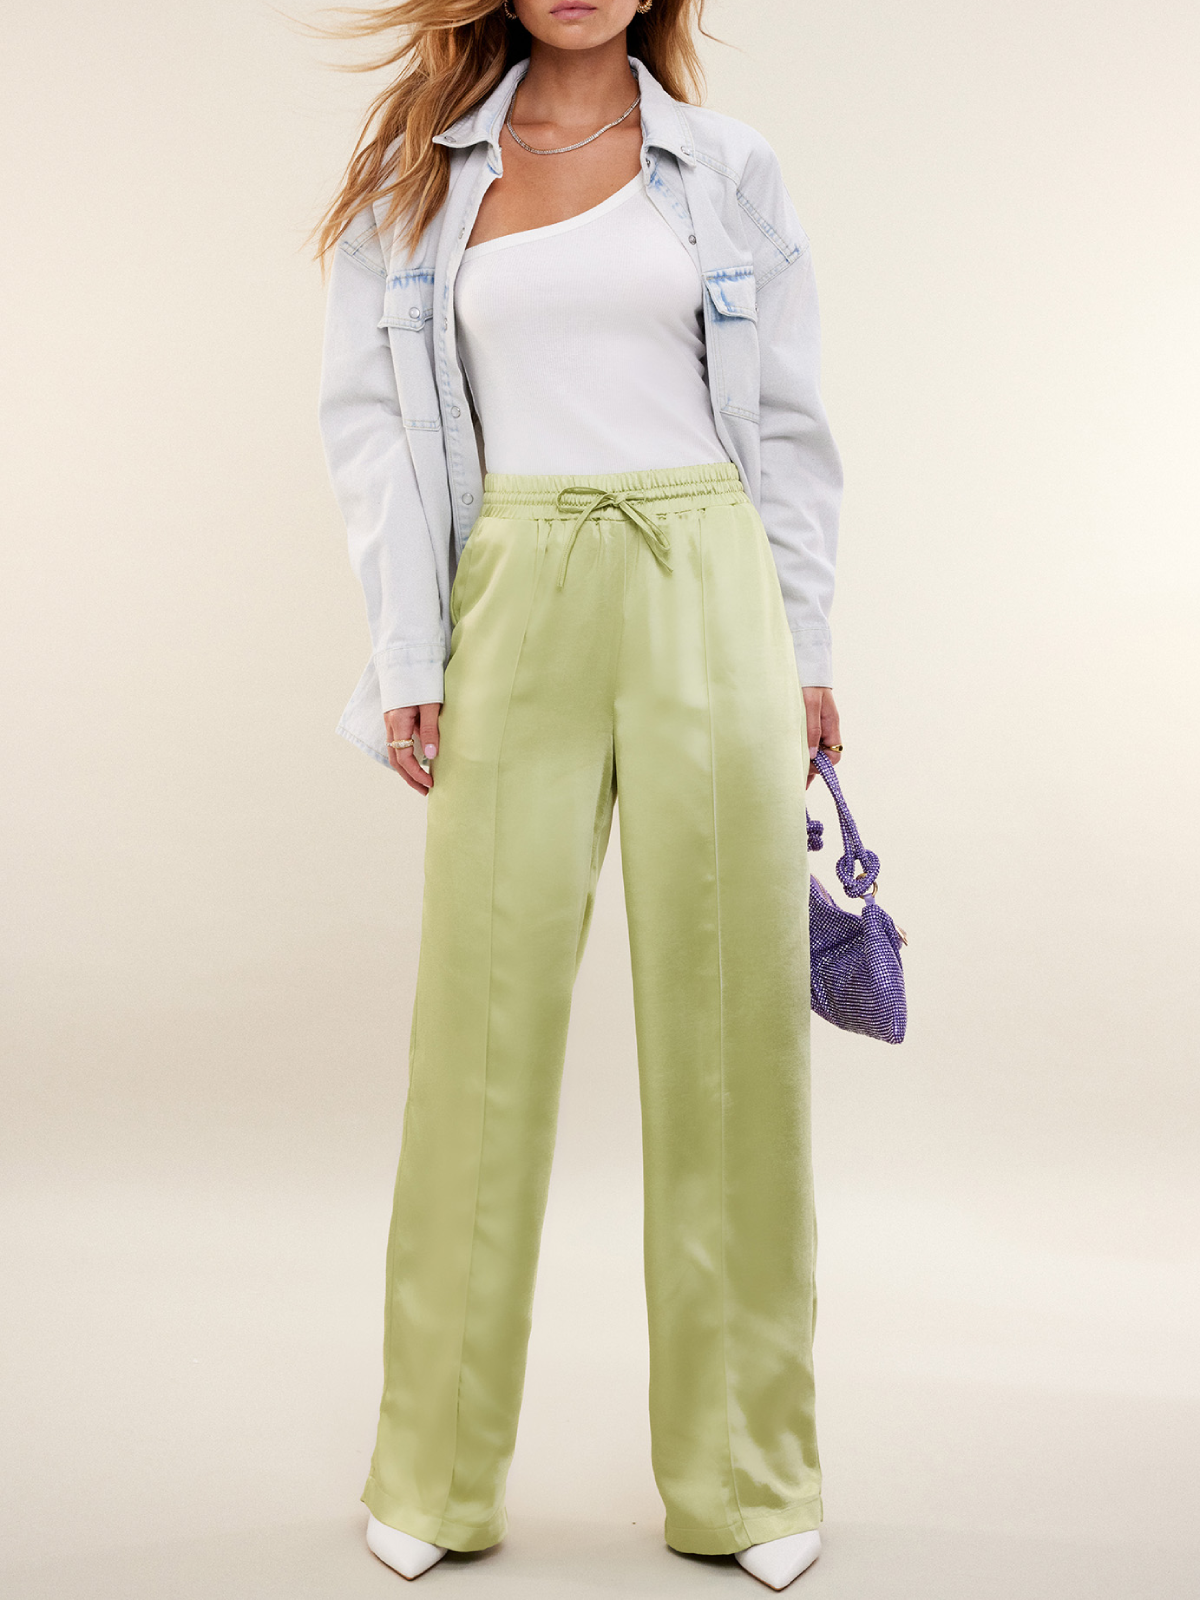 LOAVIES Unchanging Mind Trousers